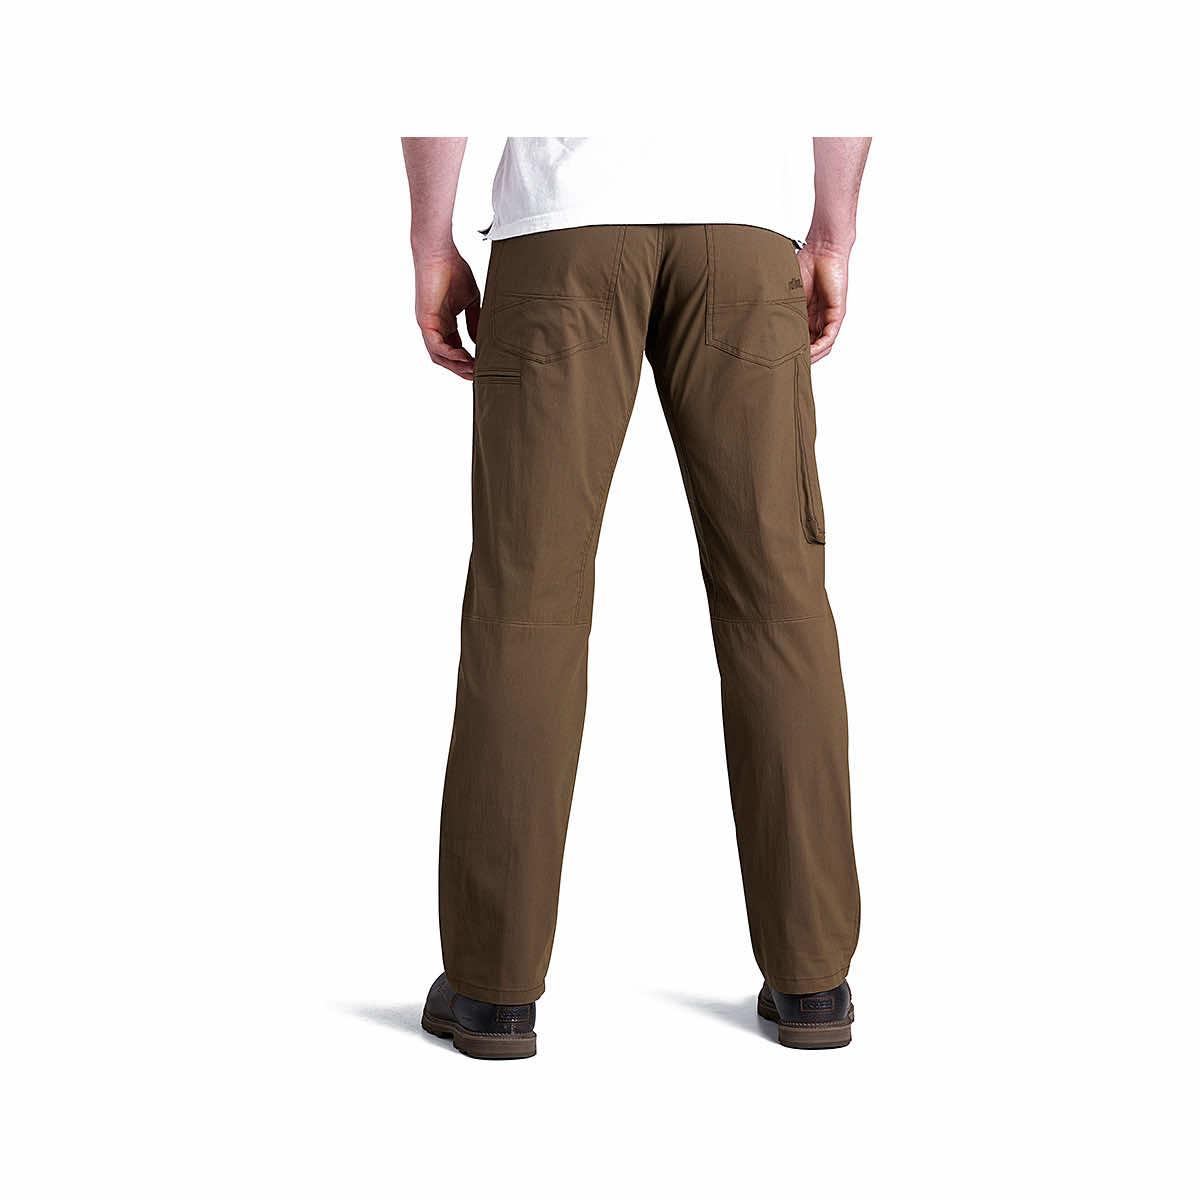 Mast General Store  Women's Rydr Pants